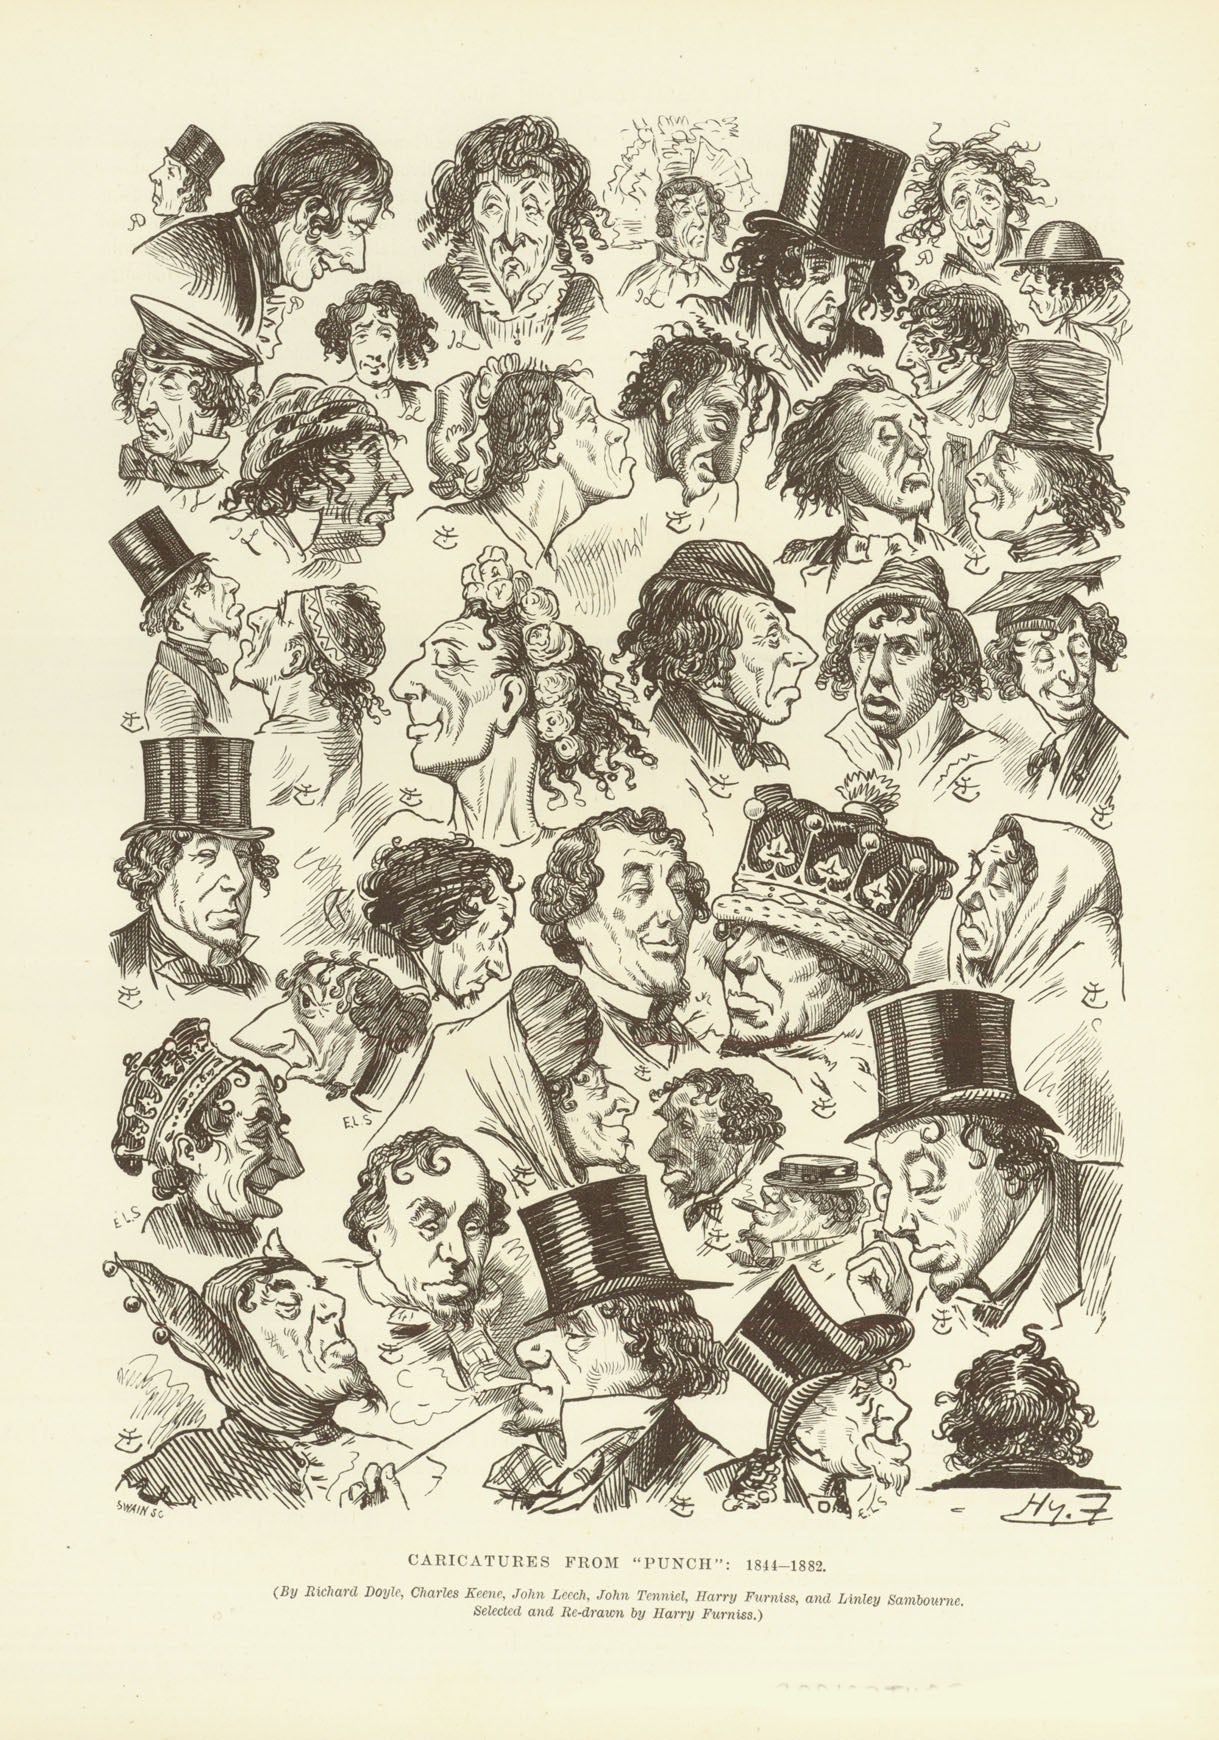 "Caricatures from "Punch" 1844-1882"  Wood engraving published 1895